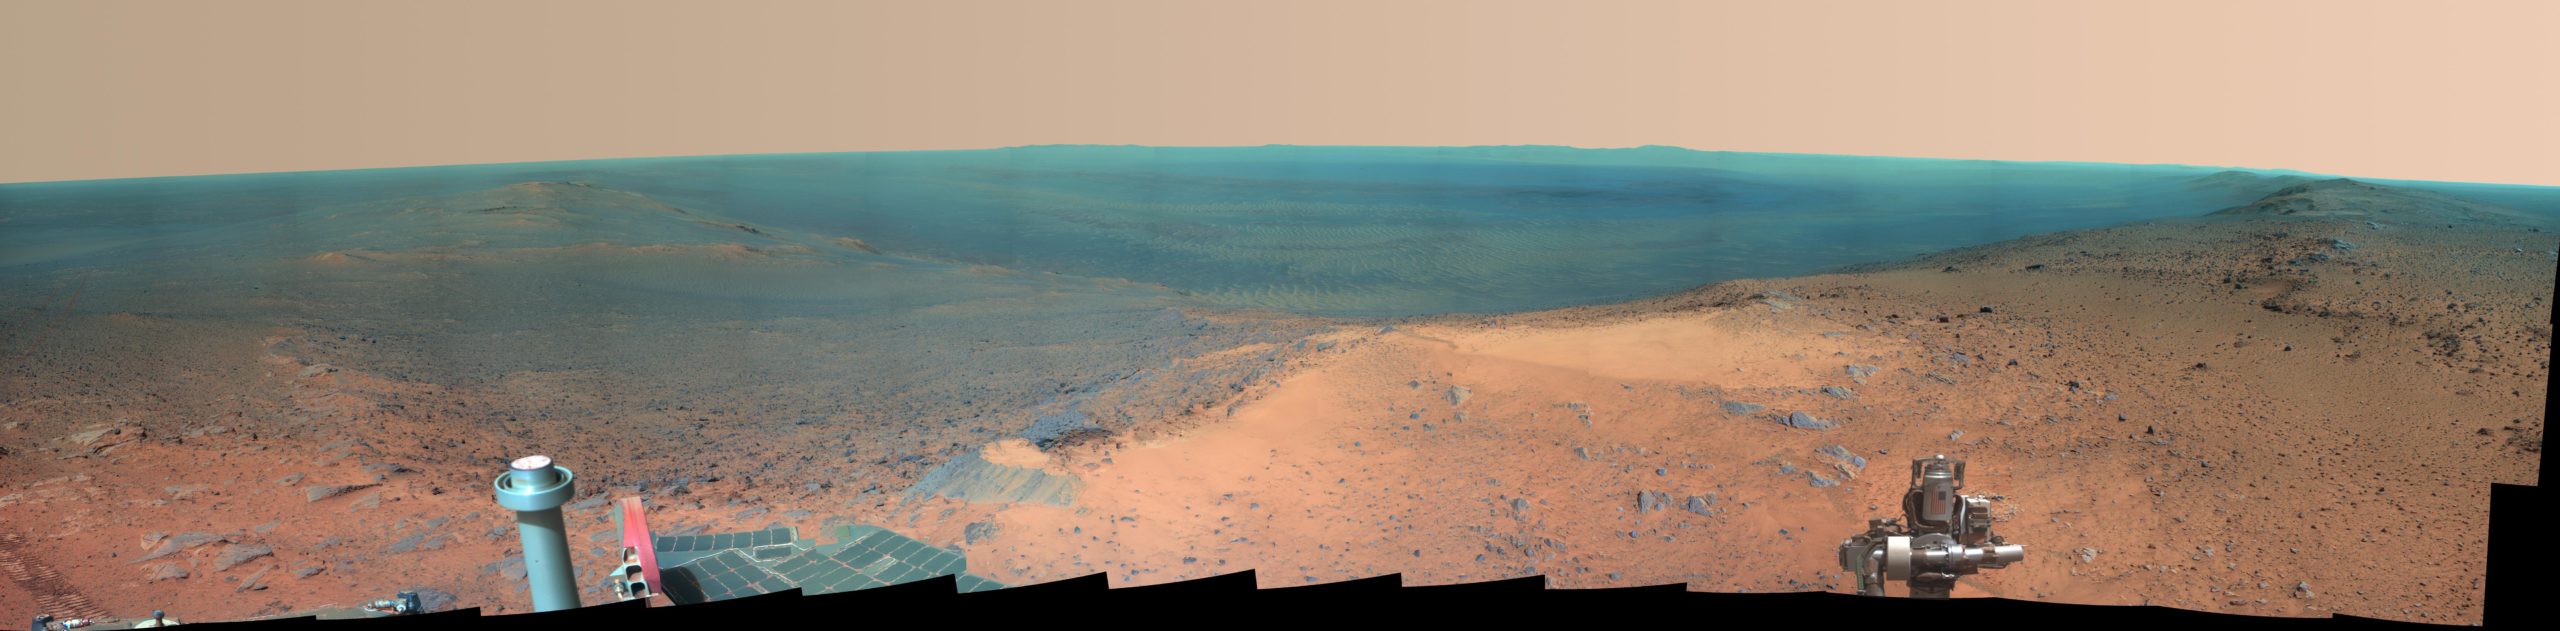 NASA’s Opportunity Has Now Explored The Martian Surface For 11 Years